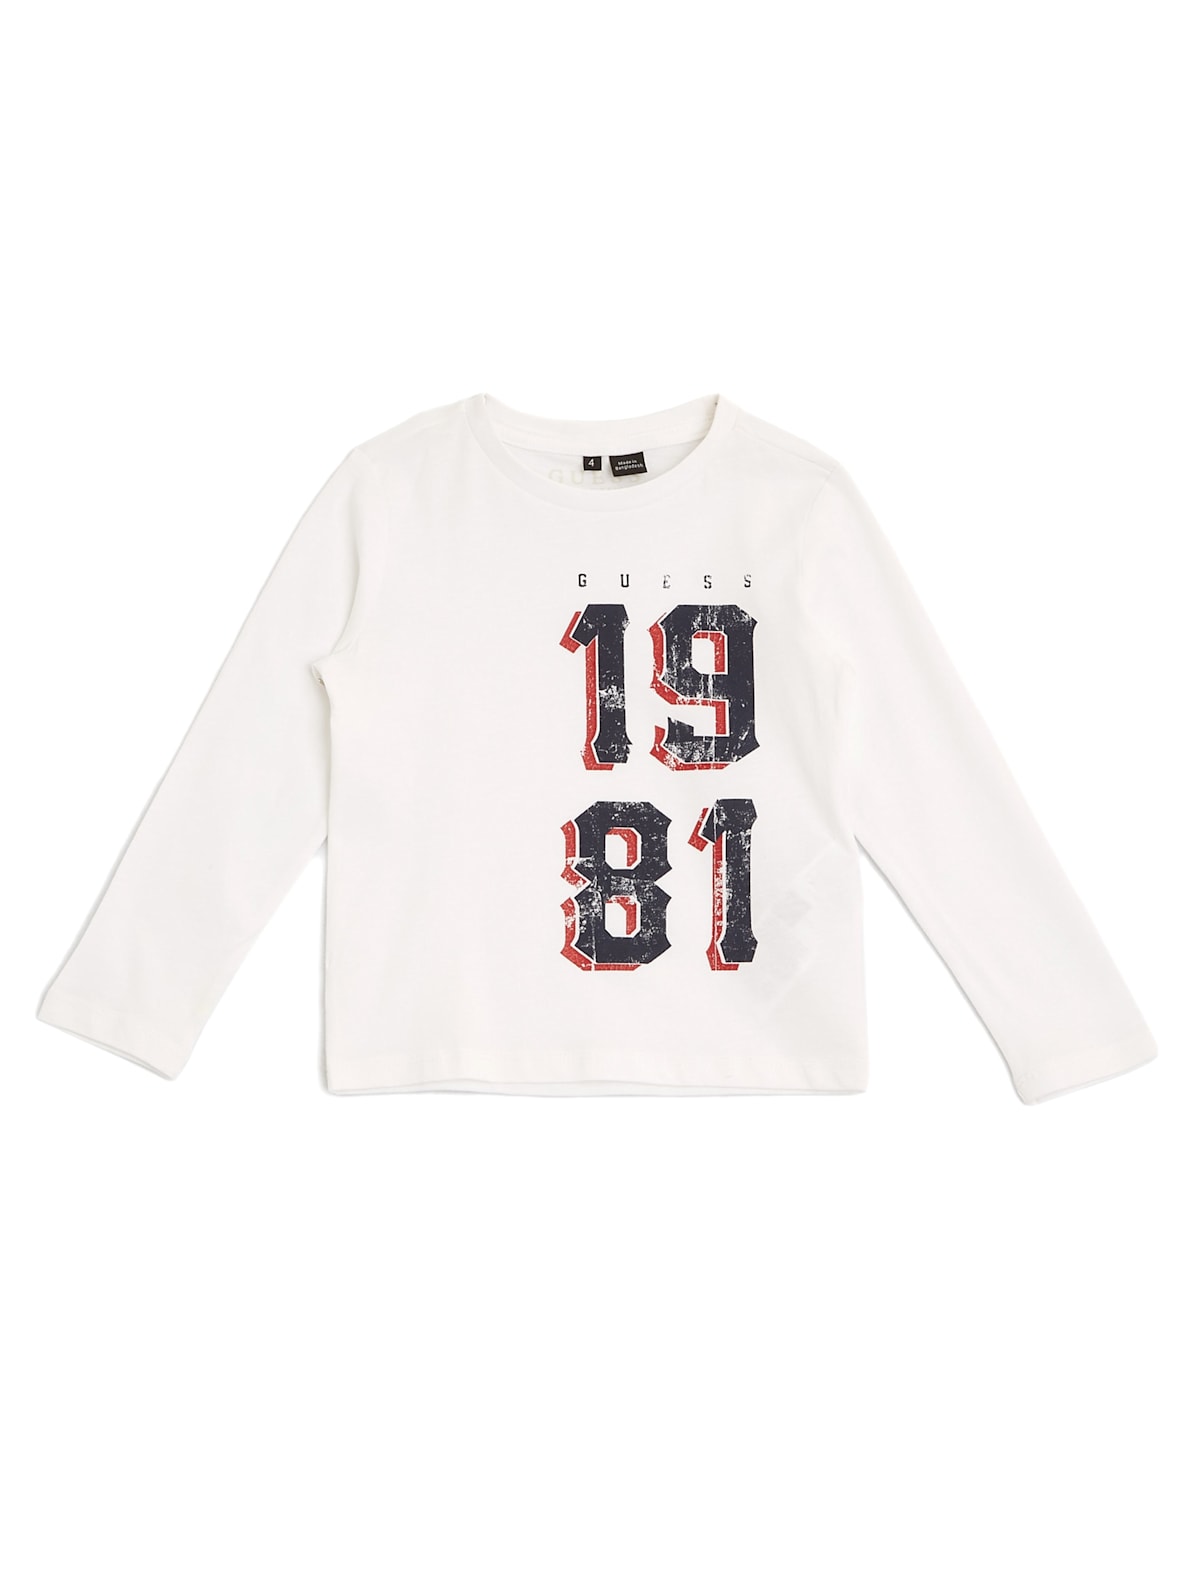 Guess Who Long Sleeve T-Shirt Distressed Logo White Tee